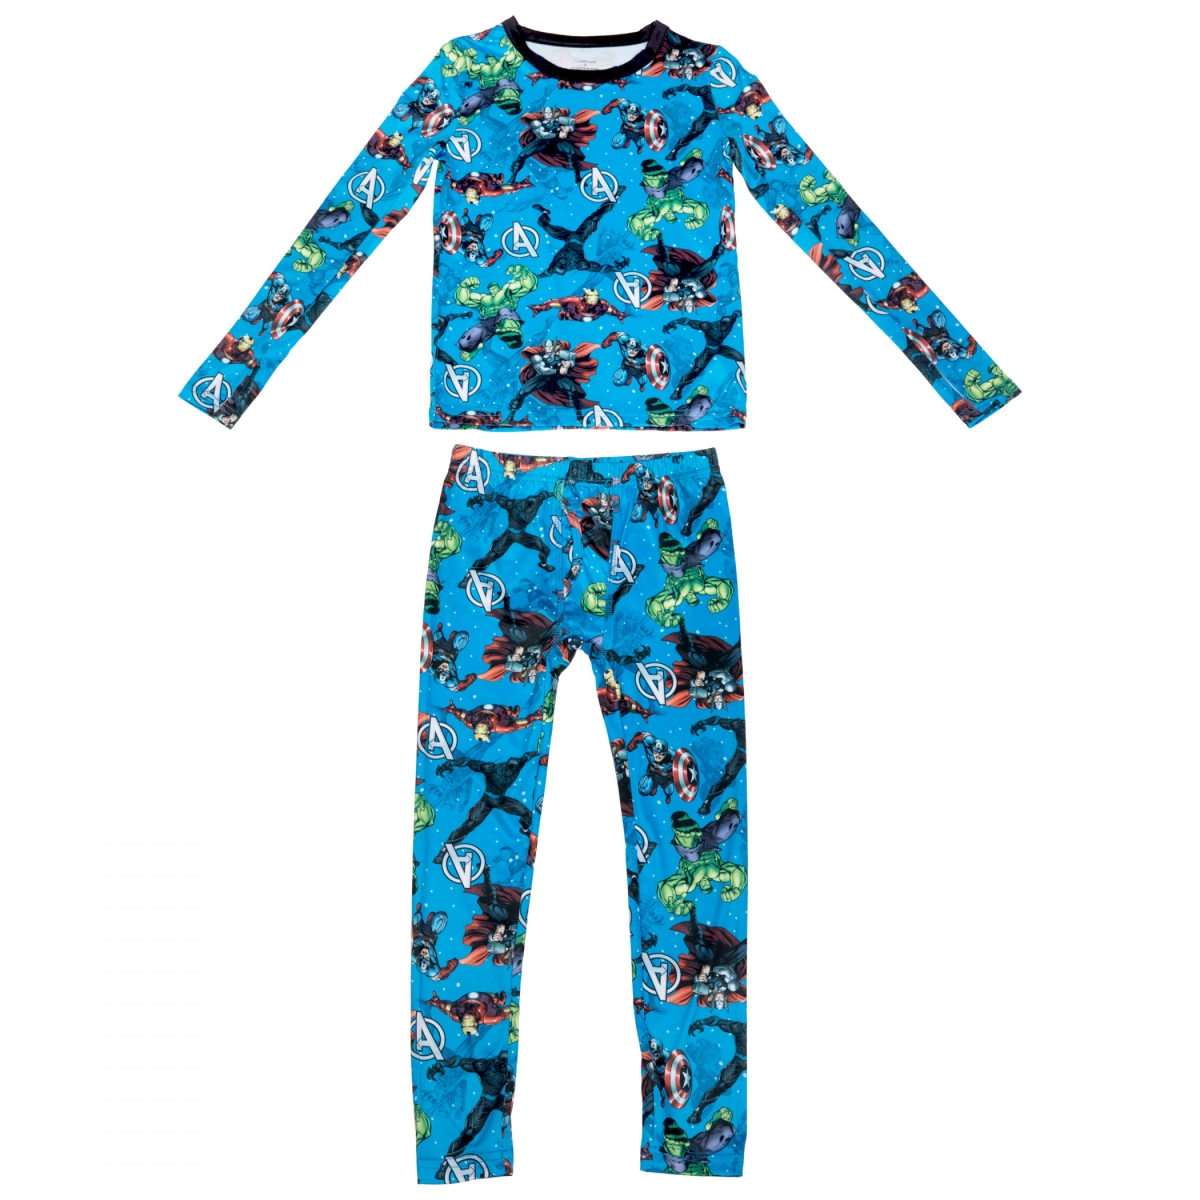 Picture of Avengers 846000-mall-7-8 Marvel Comics the Avengers Mightiest Heroes Boys Pajama Set - Small - 7-8 - 2 Piece